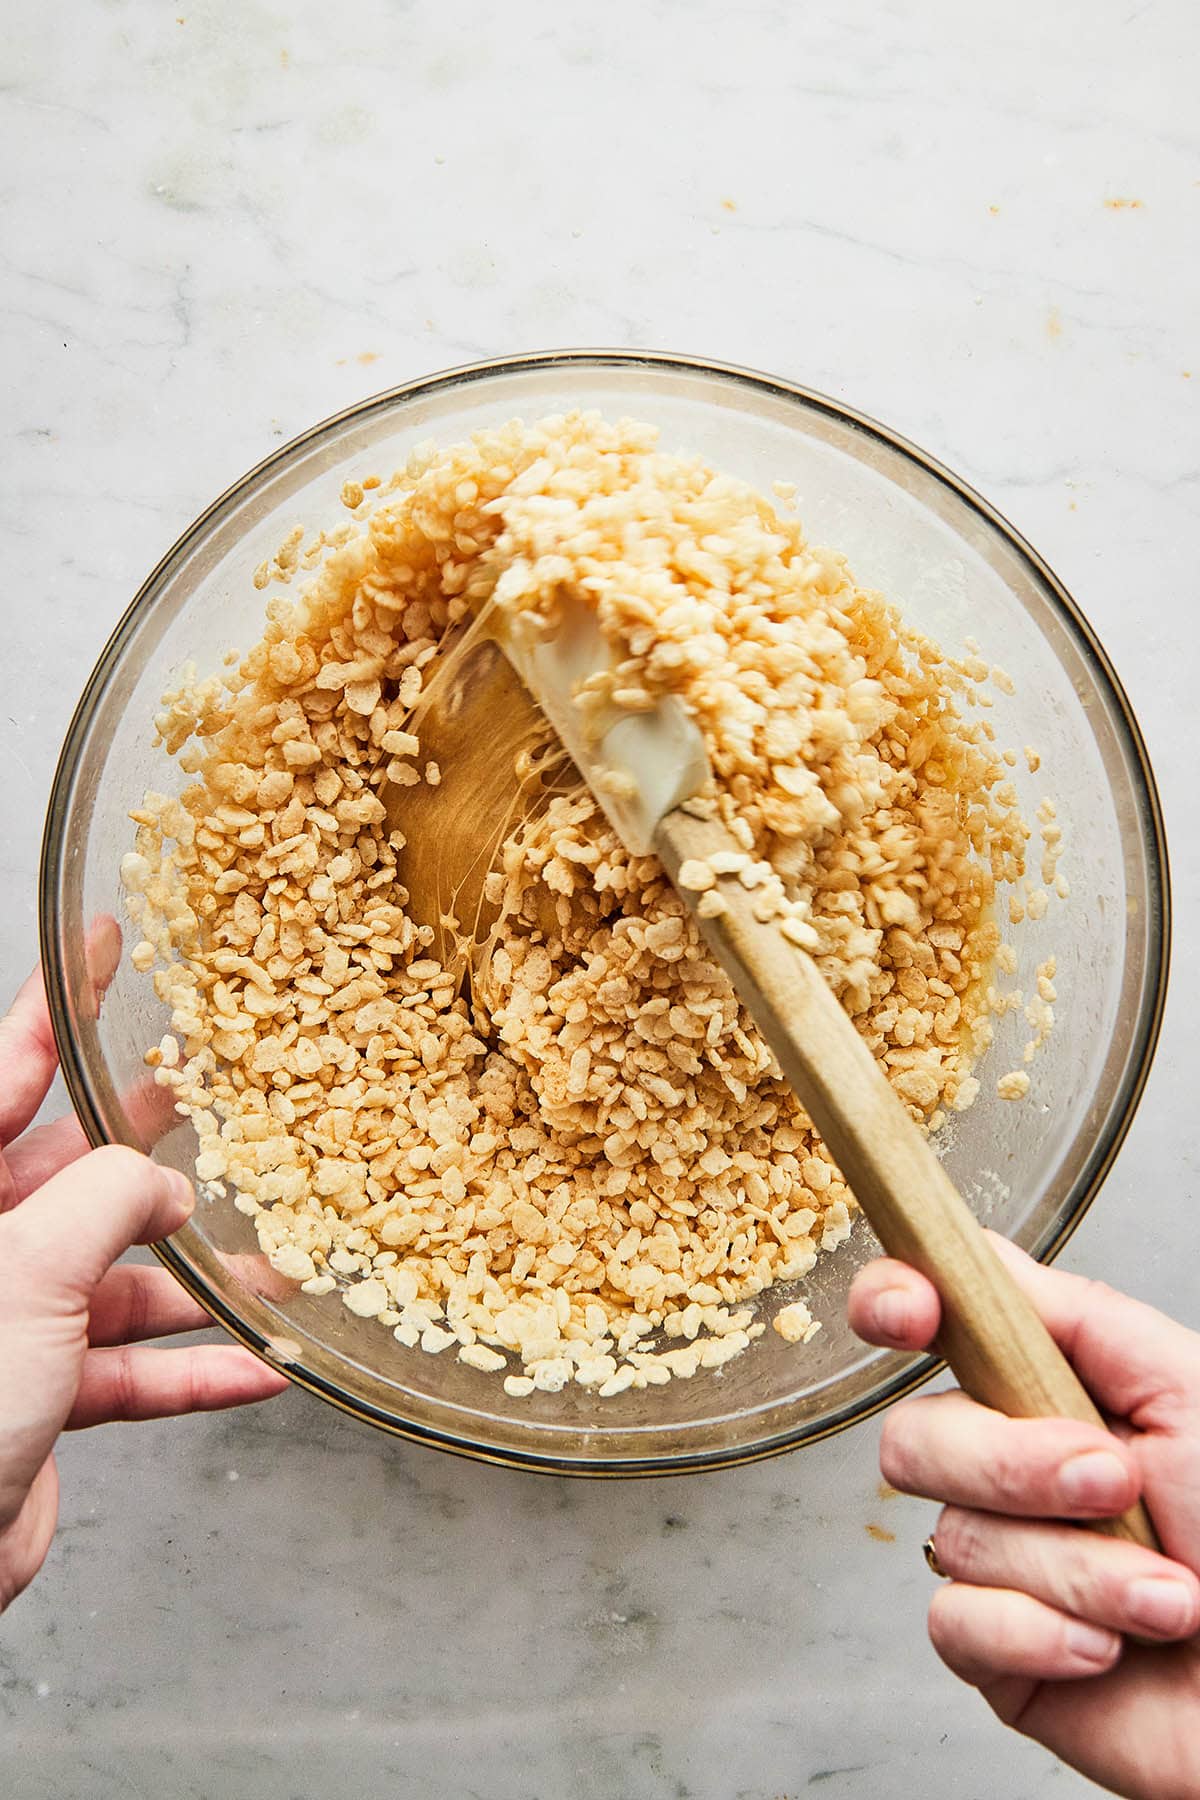 A hand stirring Rice Krispies ceral into a bowl of melted marshmalllow and peanut butter in a mixing bowl.